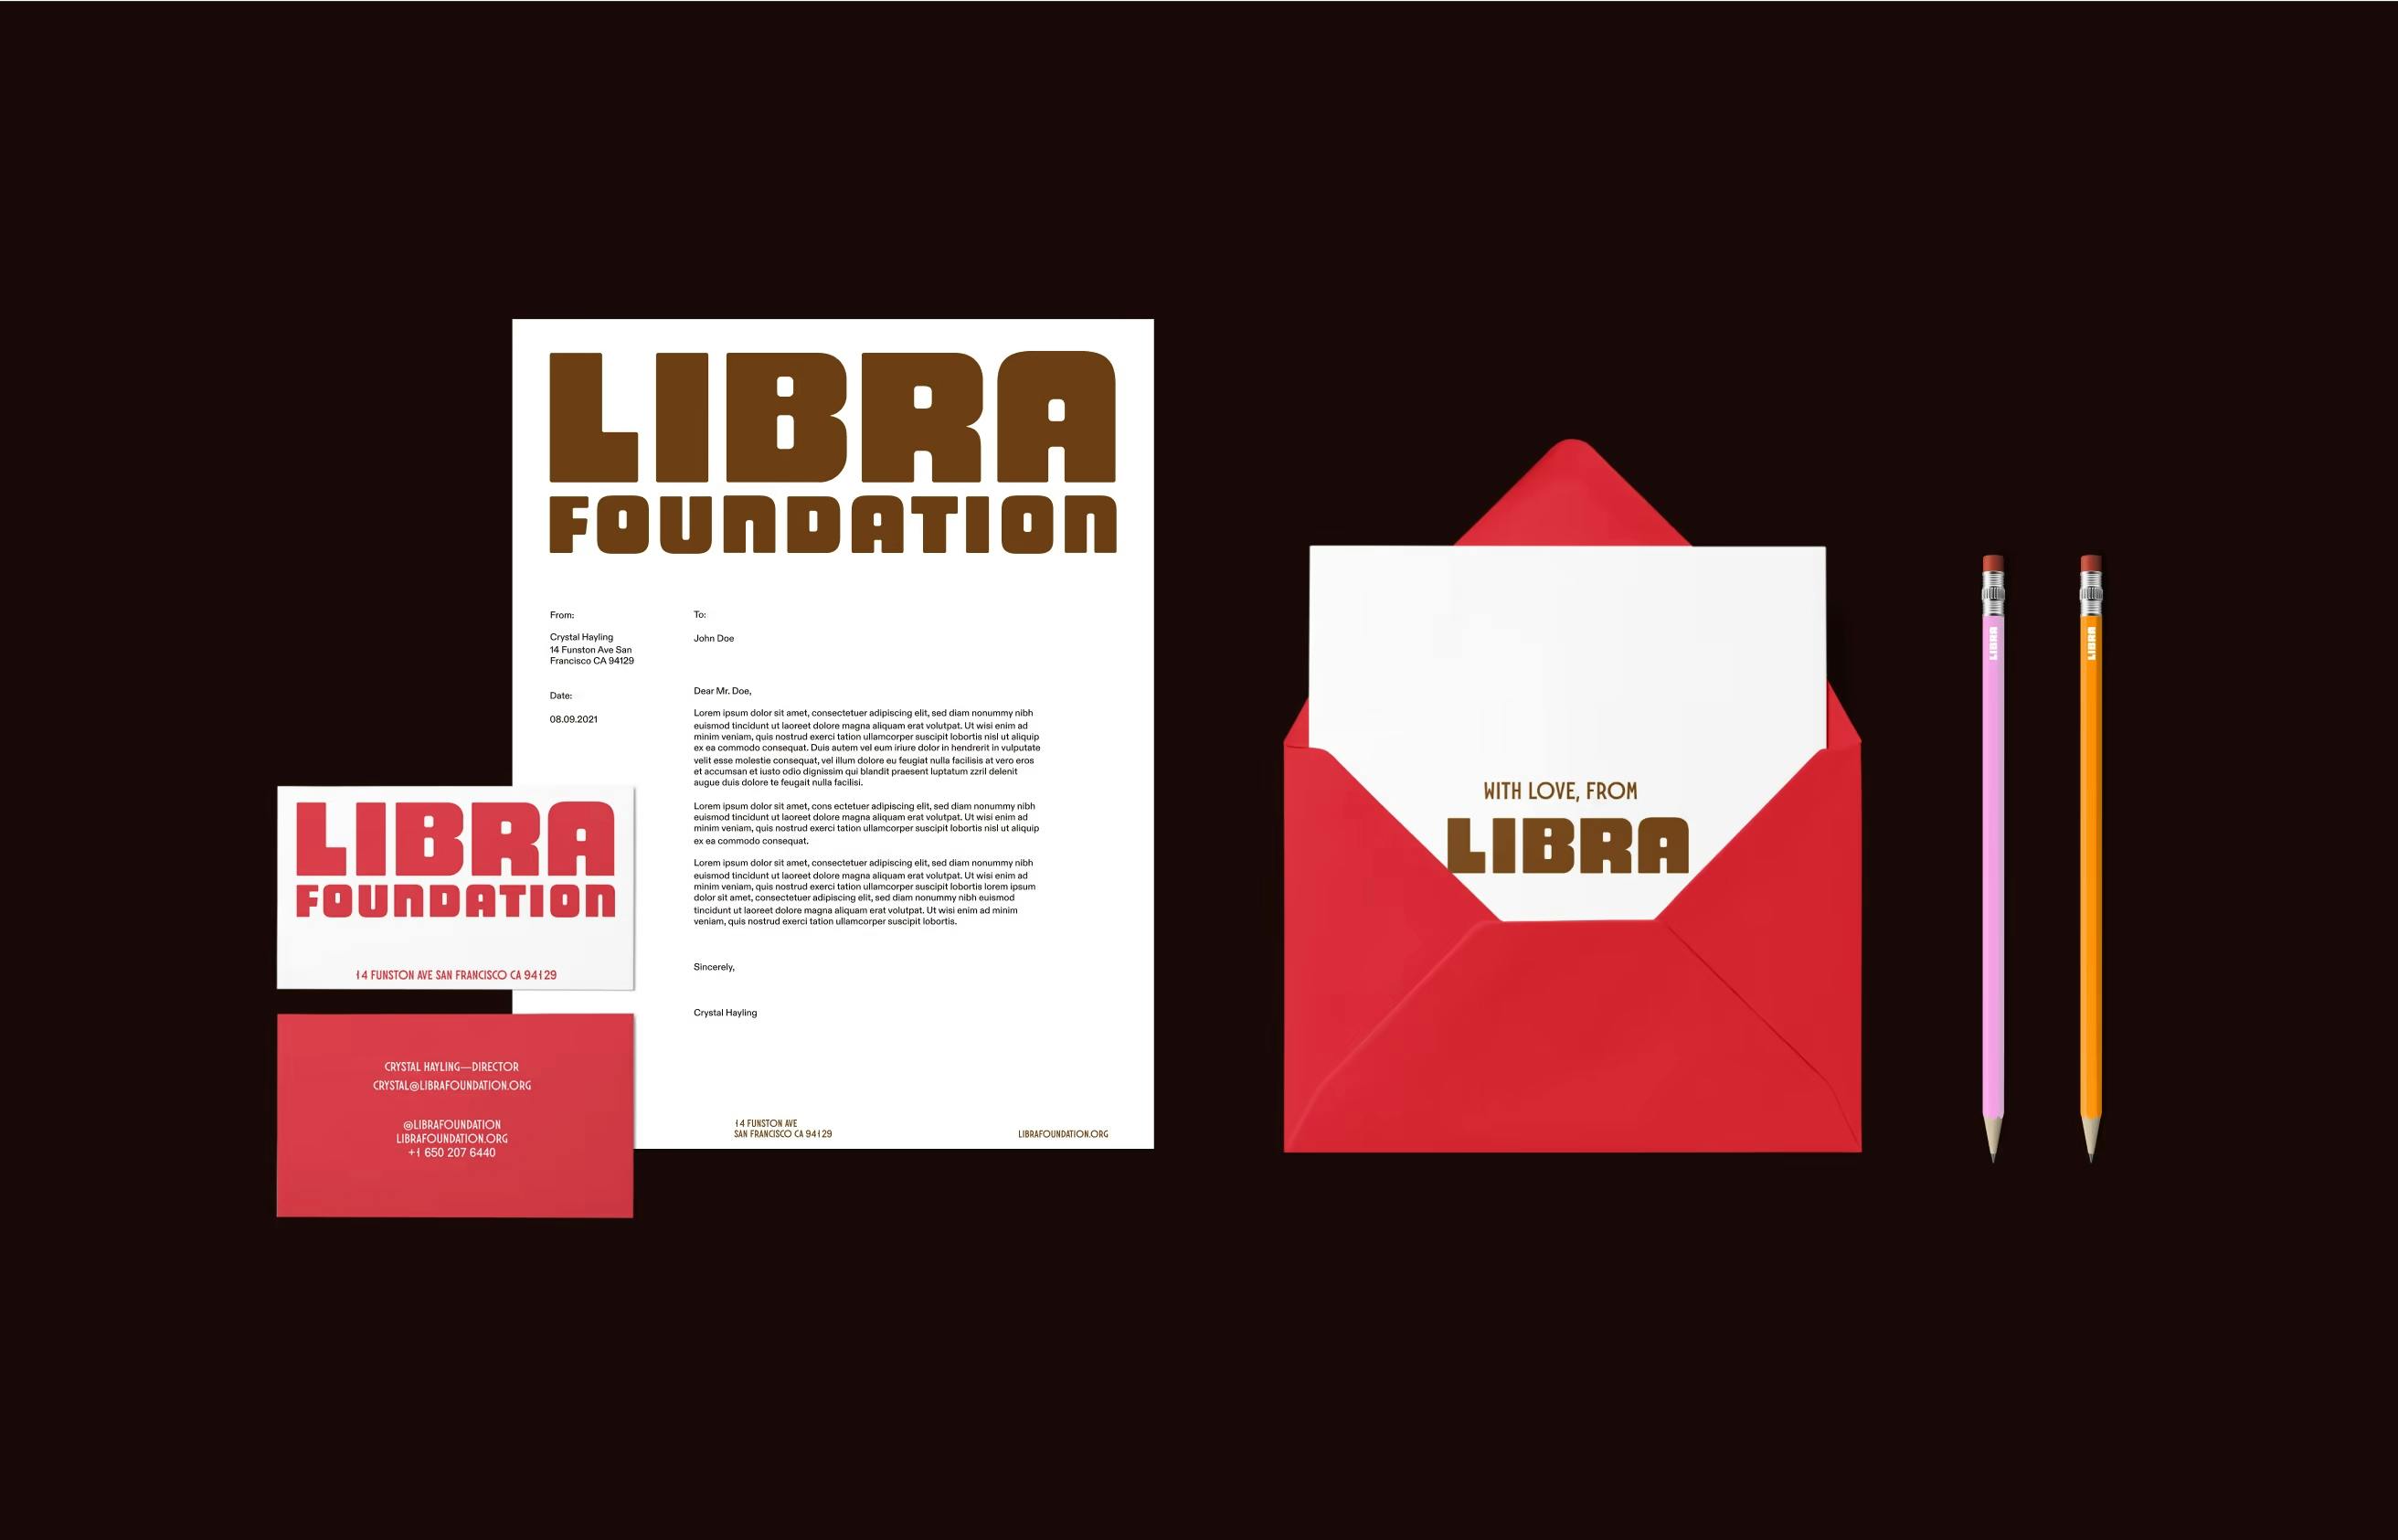 Stationary with Libra on it